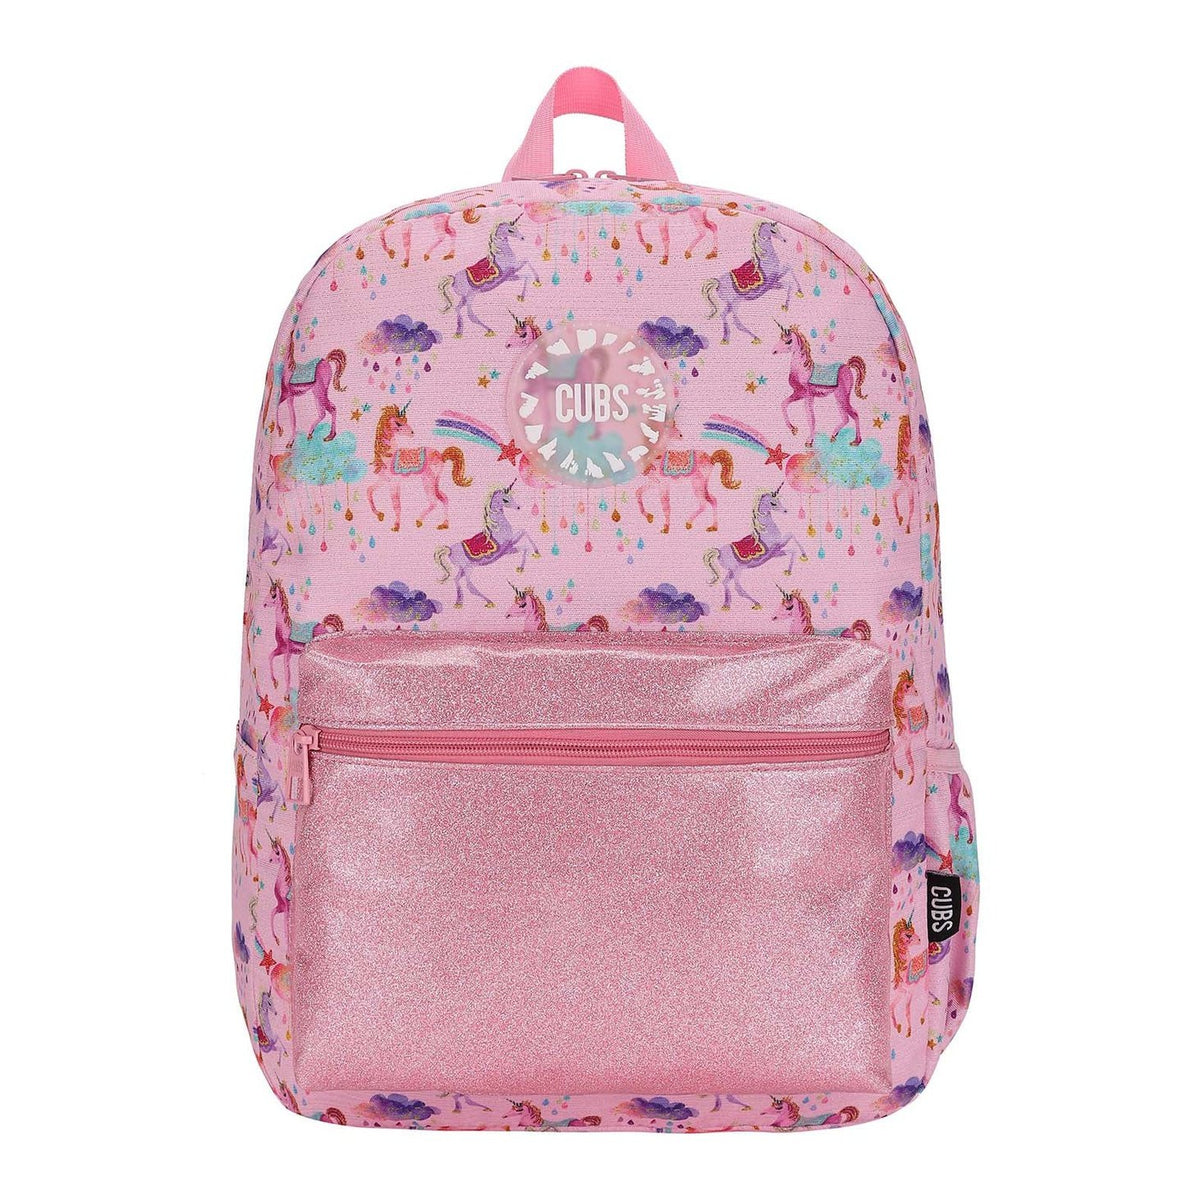 Shiny Fabric Rose Pink Backpack